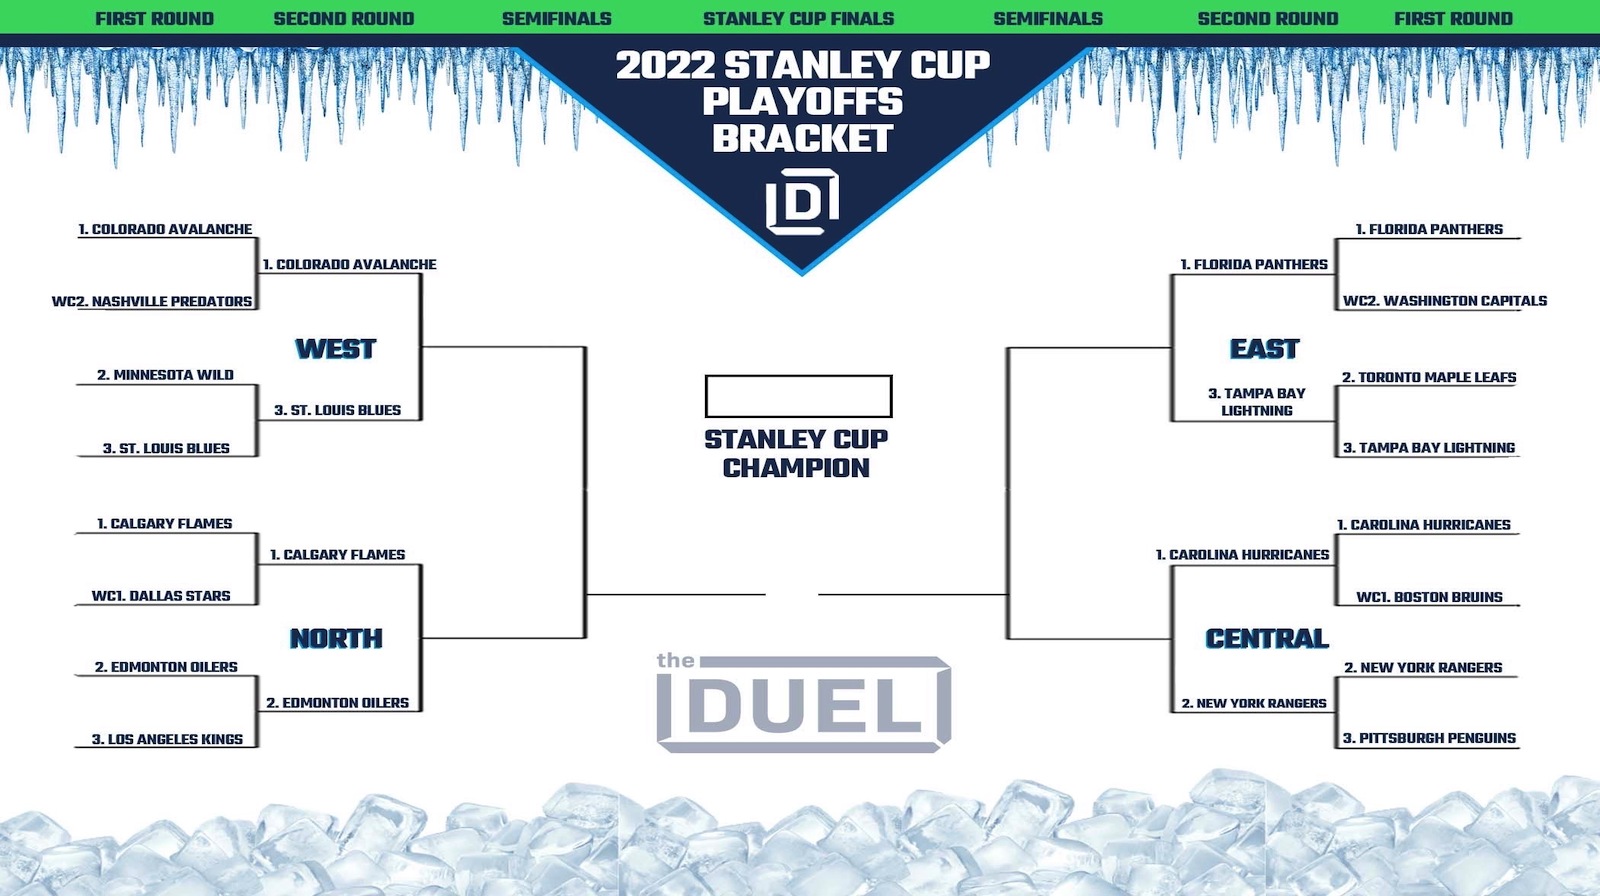 NHL playoff bracket 2022: Who will Oilers play in the second round